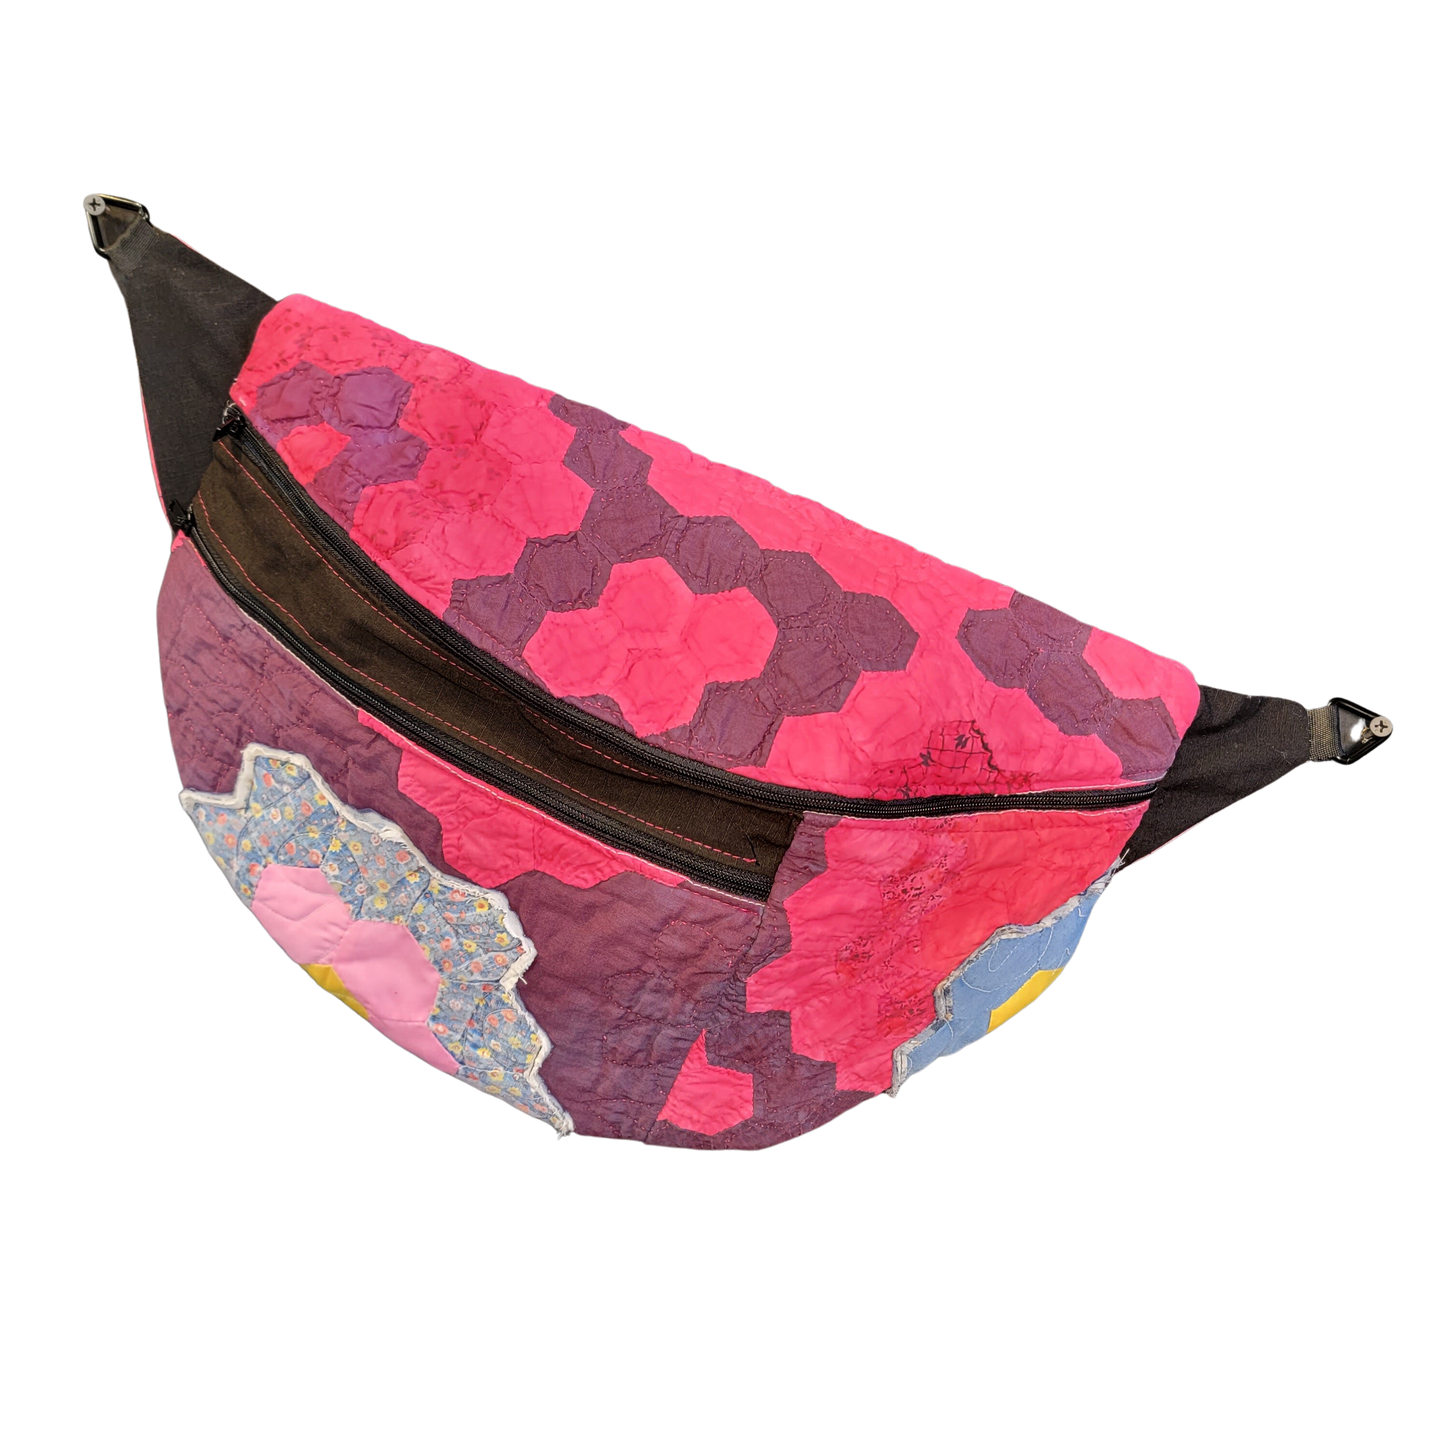 Vintage Quilt Fanny Pack - Sling Crossbody Bag - Hex Granny Floral in Hand-Dyed Pink with Over-Patching 004